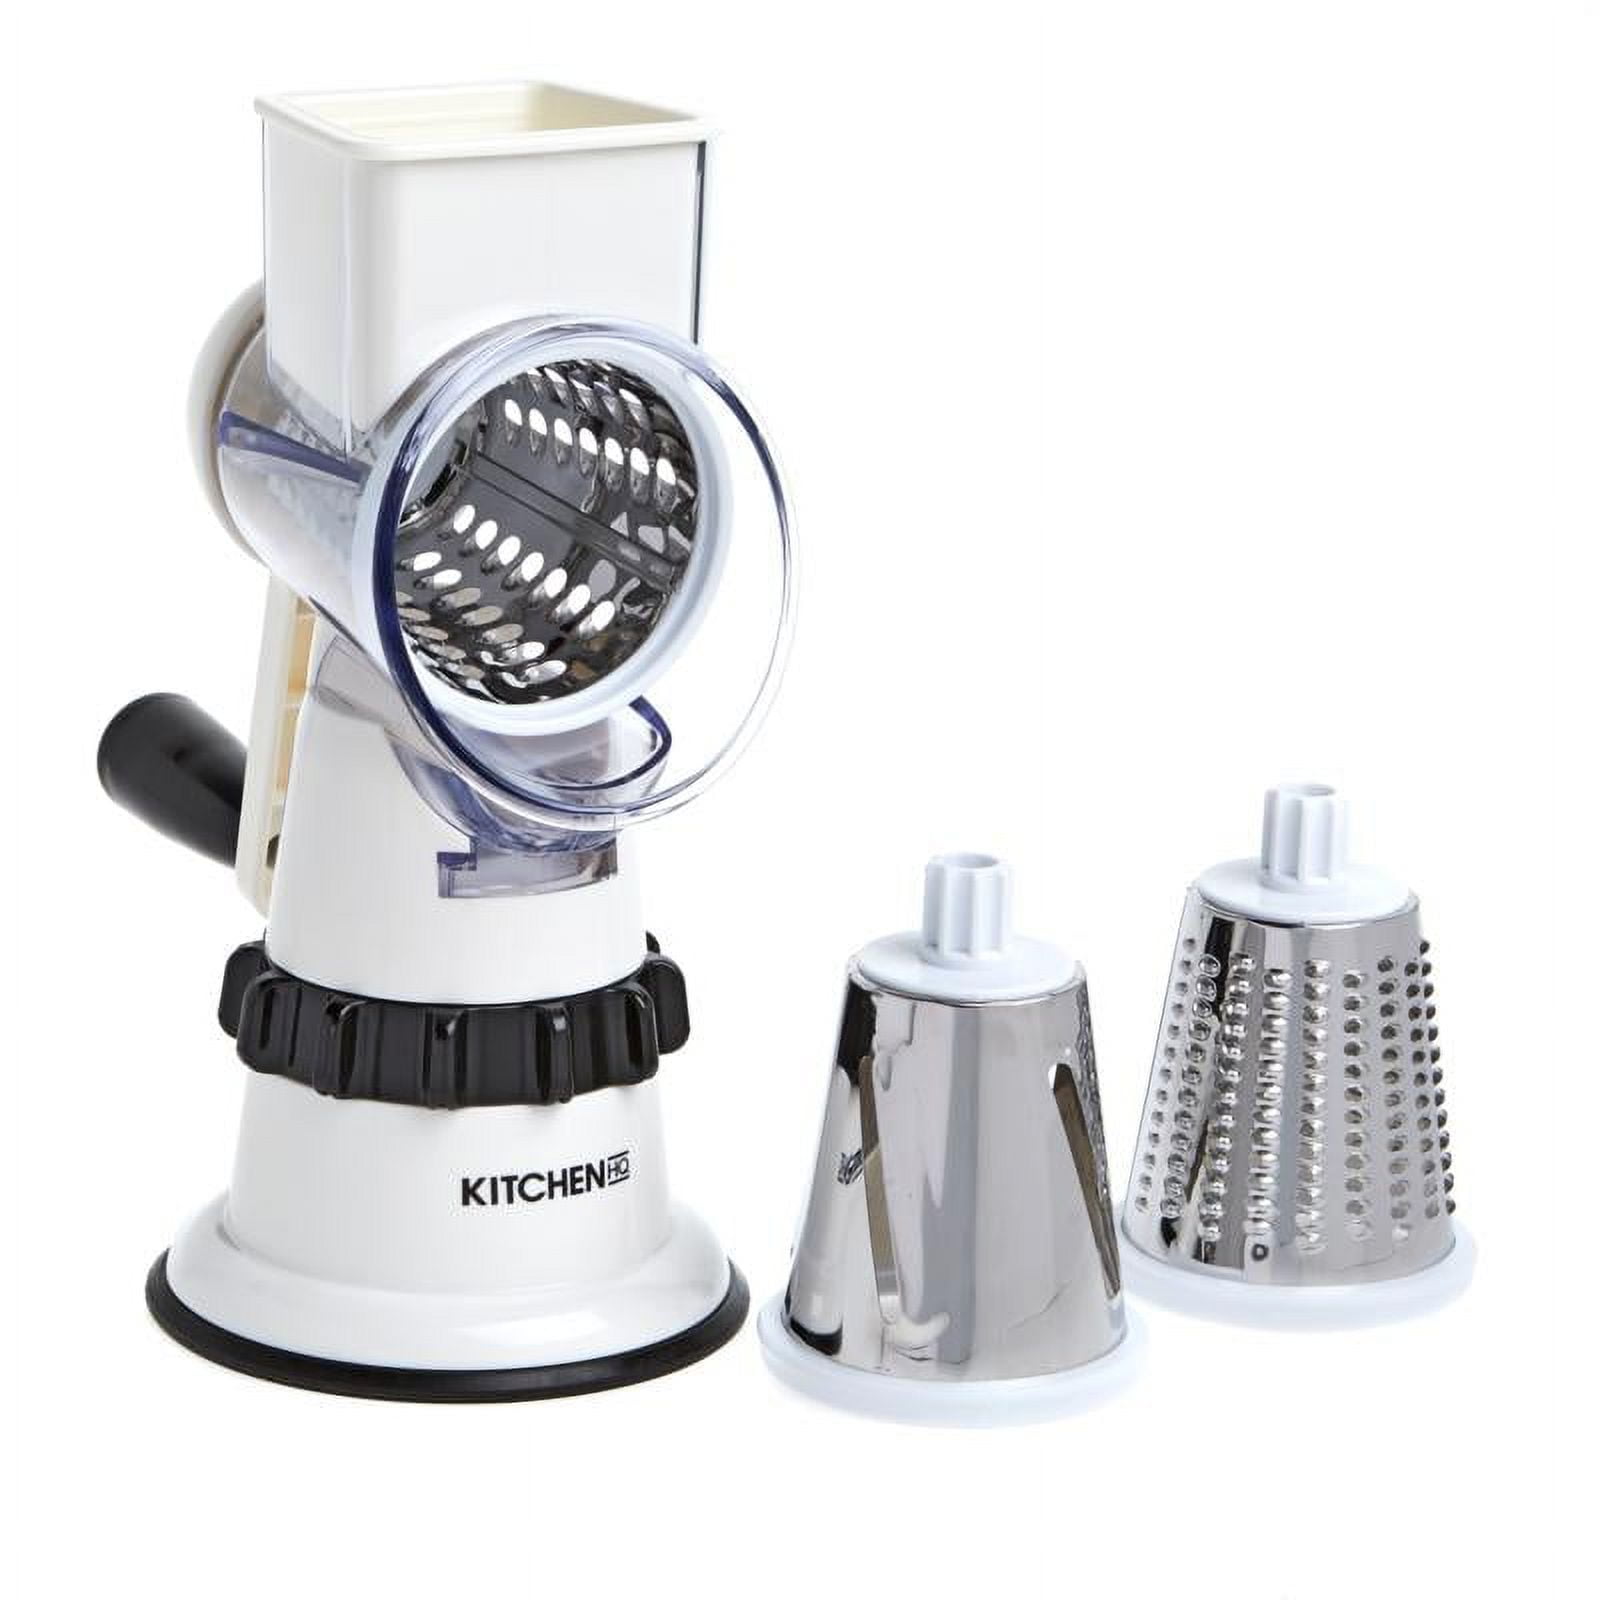 Kitchen HQ Speed Grater and Slicer with Suction Base II - 9129707